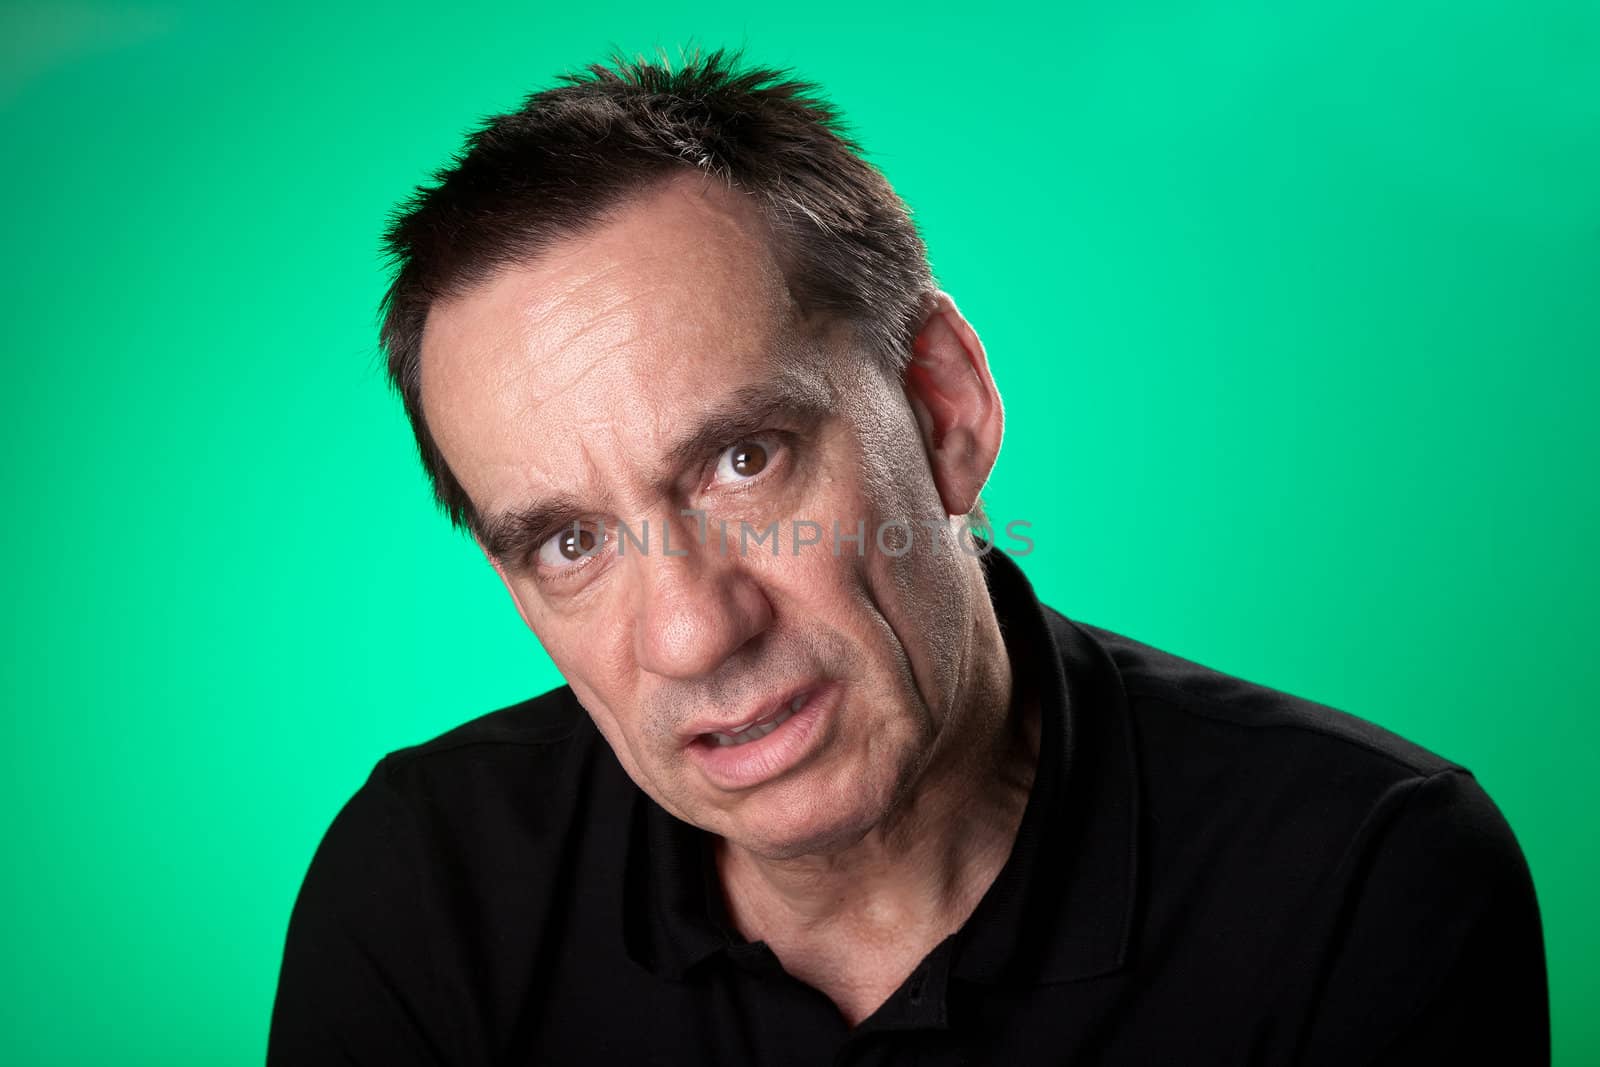 Man Looking Sick and Unhappy on Green Background by scheriton